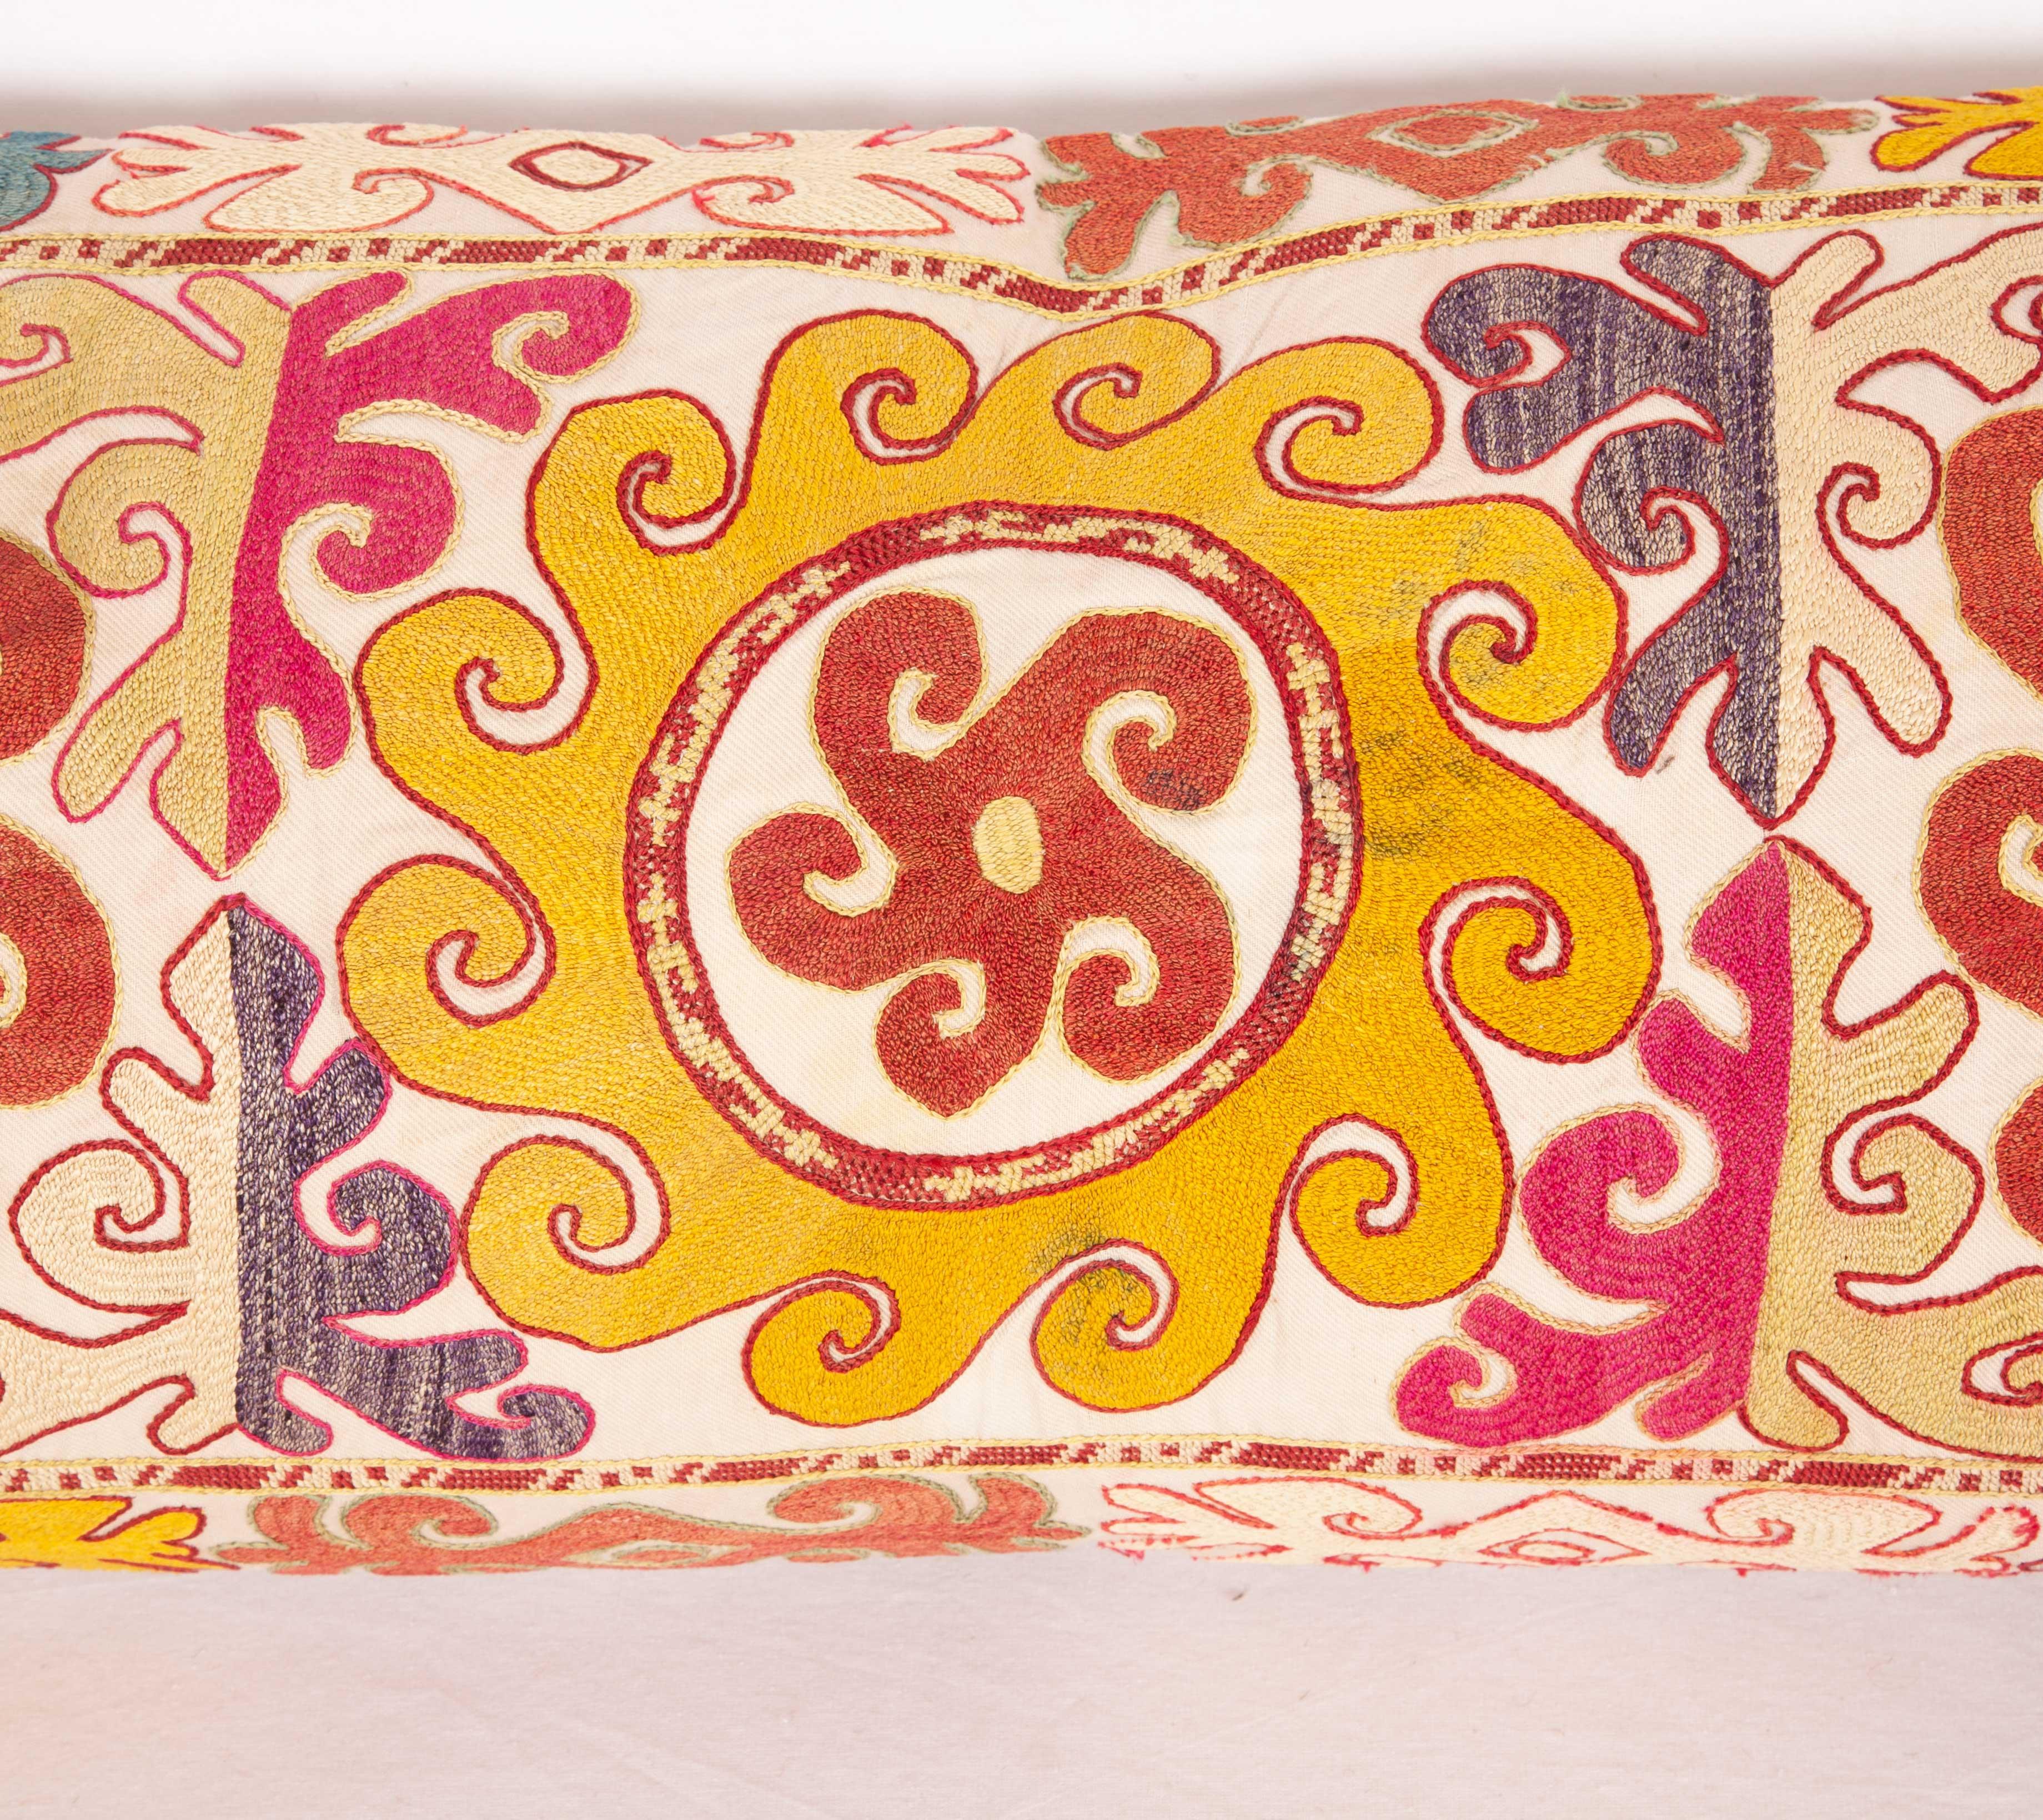 Suzani Lumbar Pillow Case Fashioned from an Uzbek Embroidered Mafrash Panel, Mid-20th C